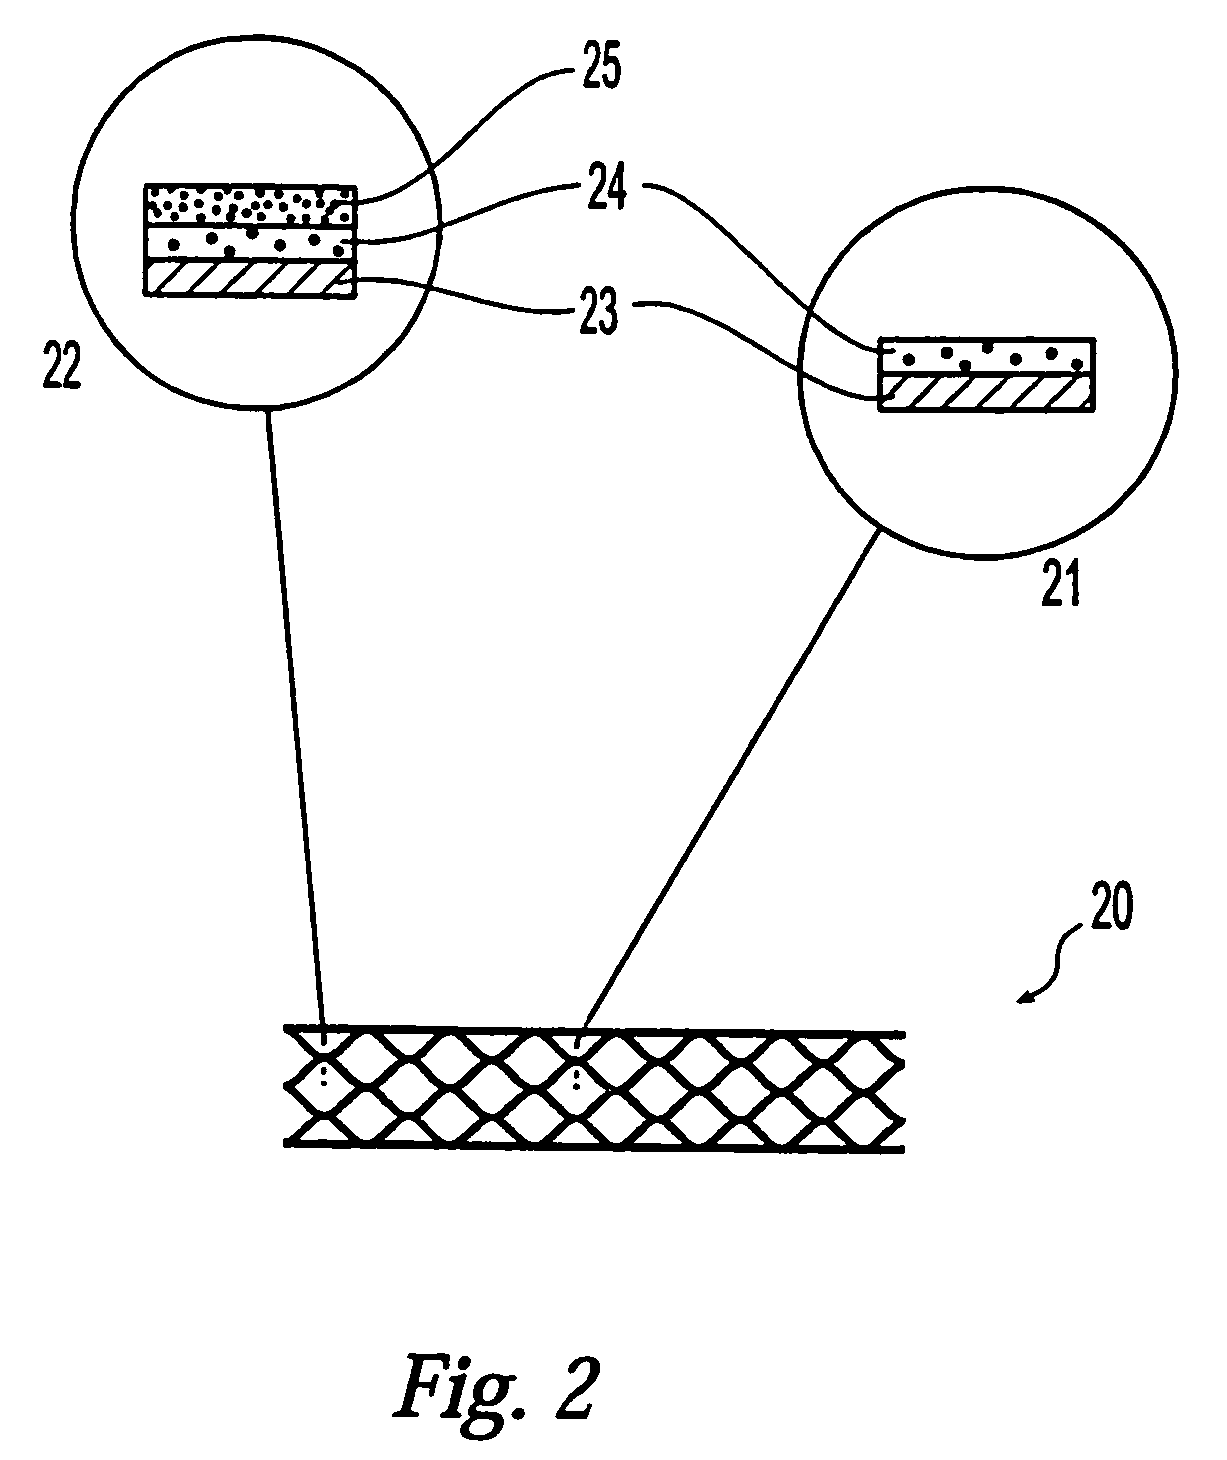 Method for making and measuring a coating on the surface of a medical device using an ultraviolet laser